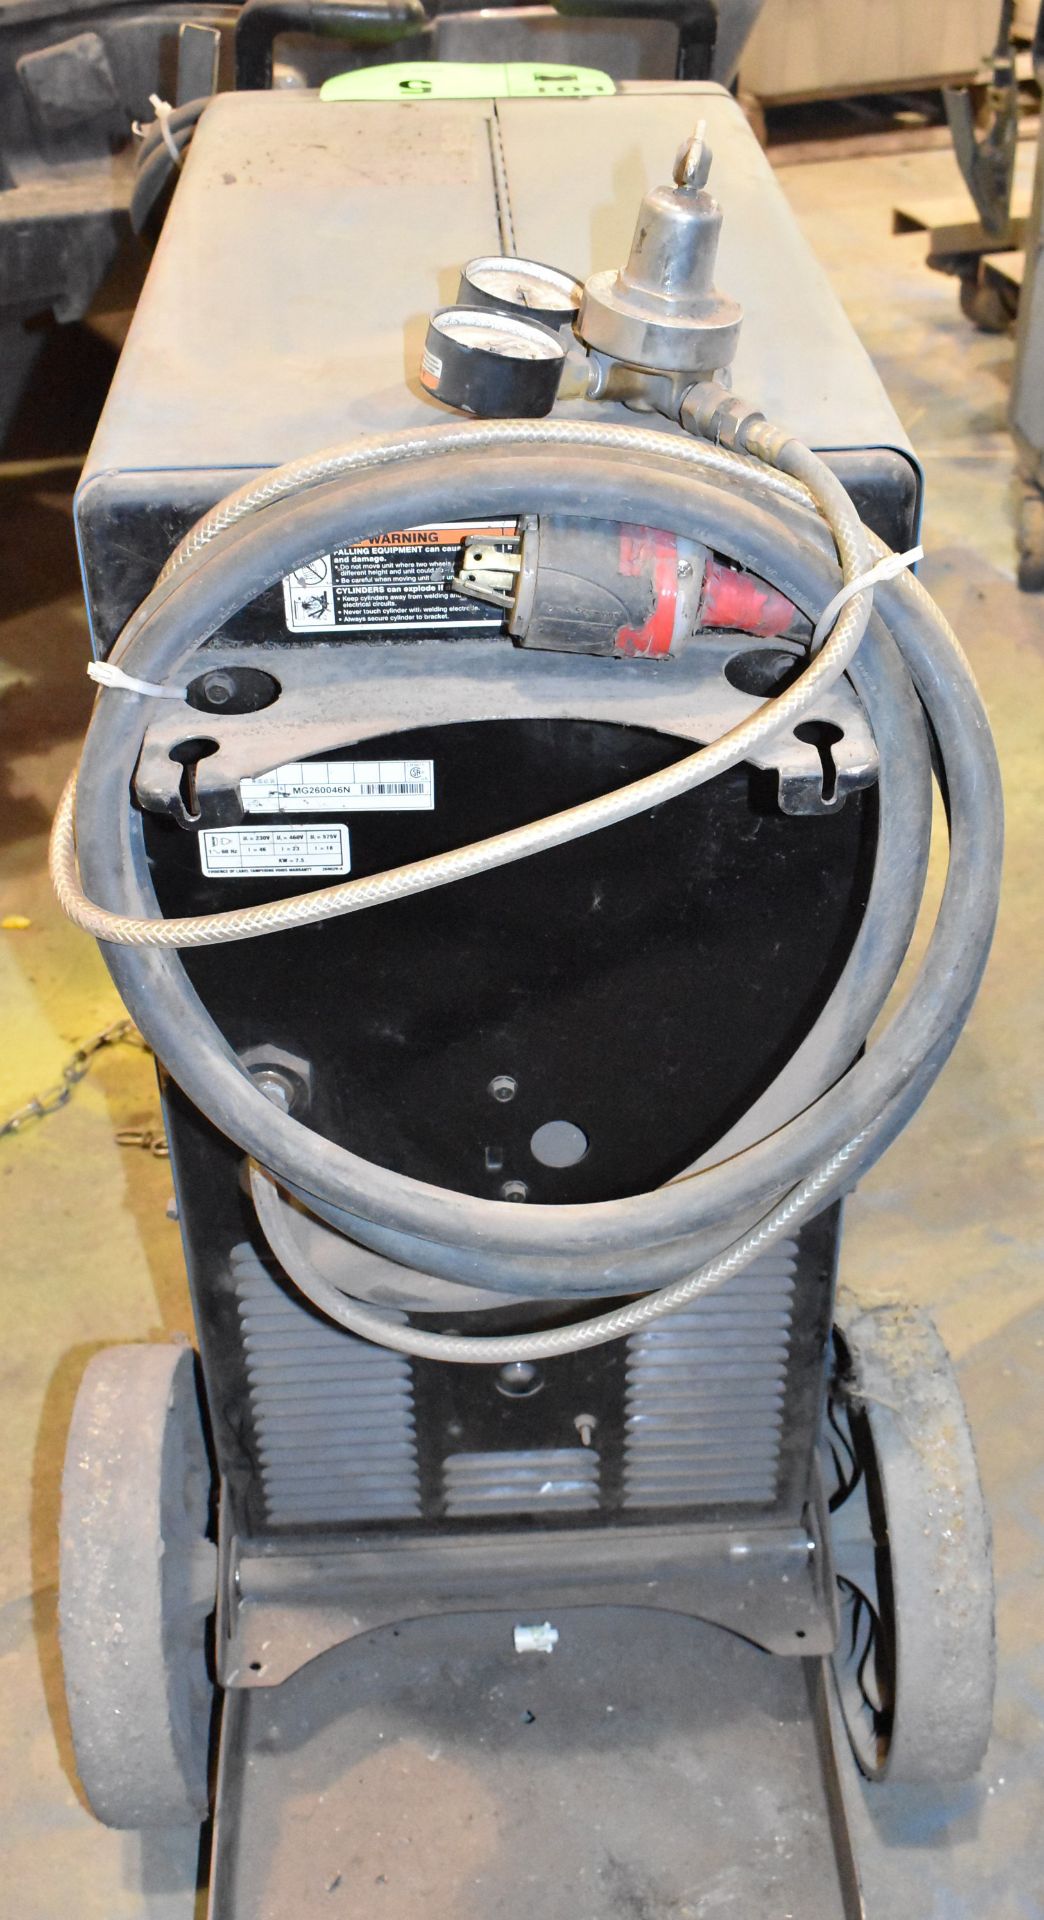 MILLER MILLERMATIC 252 MIG WELDER WITH CABLES AND GUN, S/N MJ260046N - Image 4 of 5